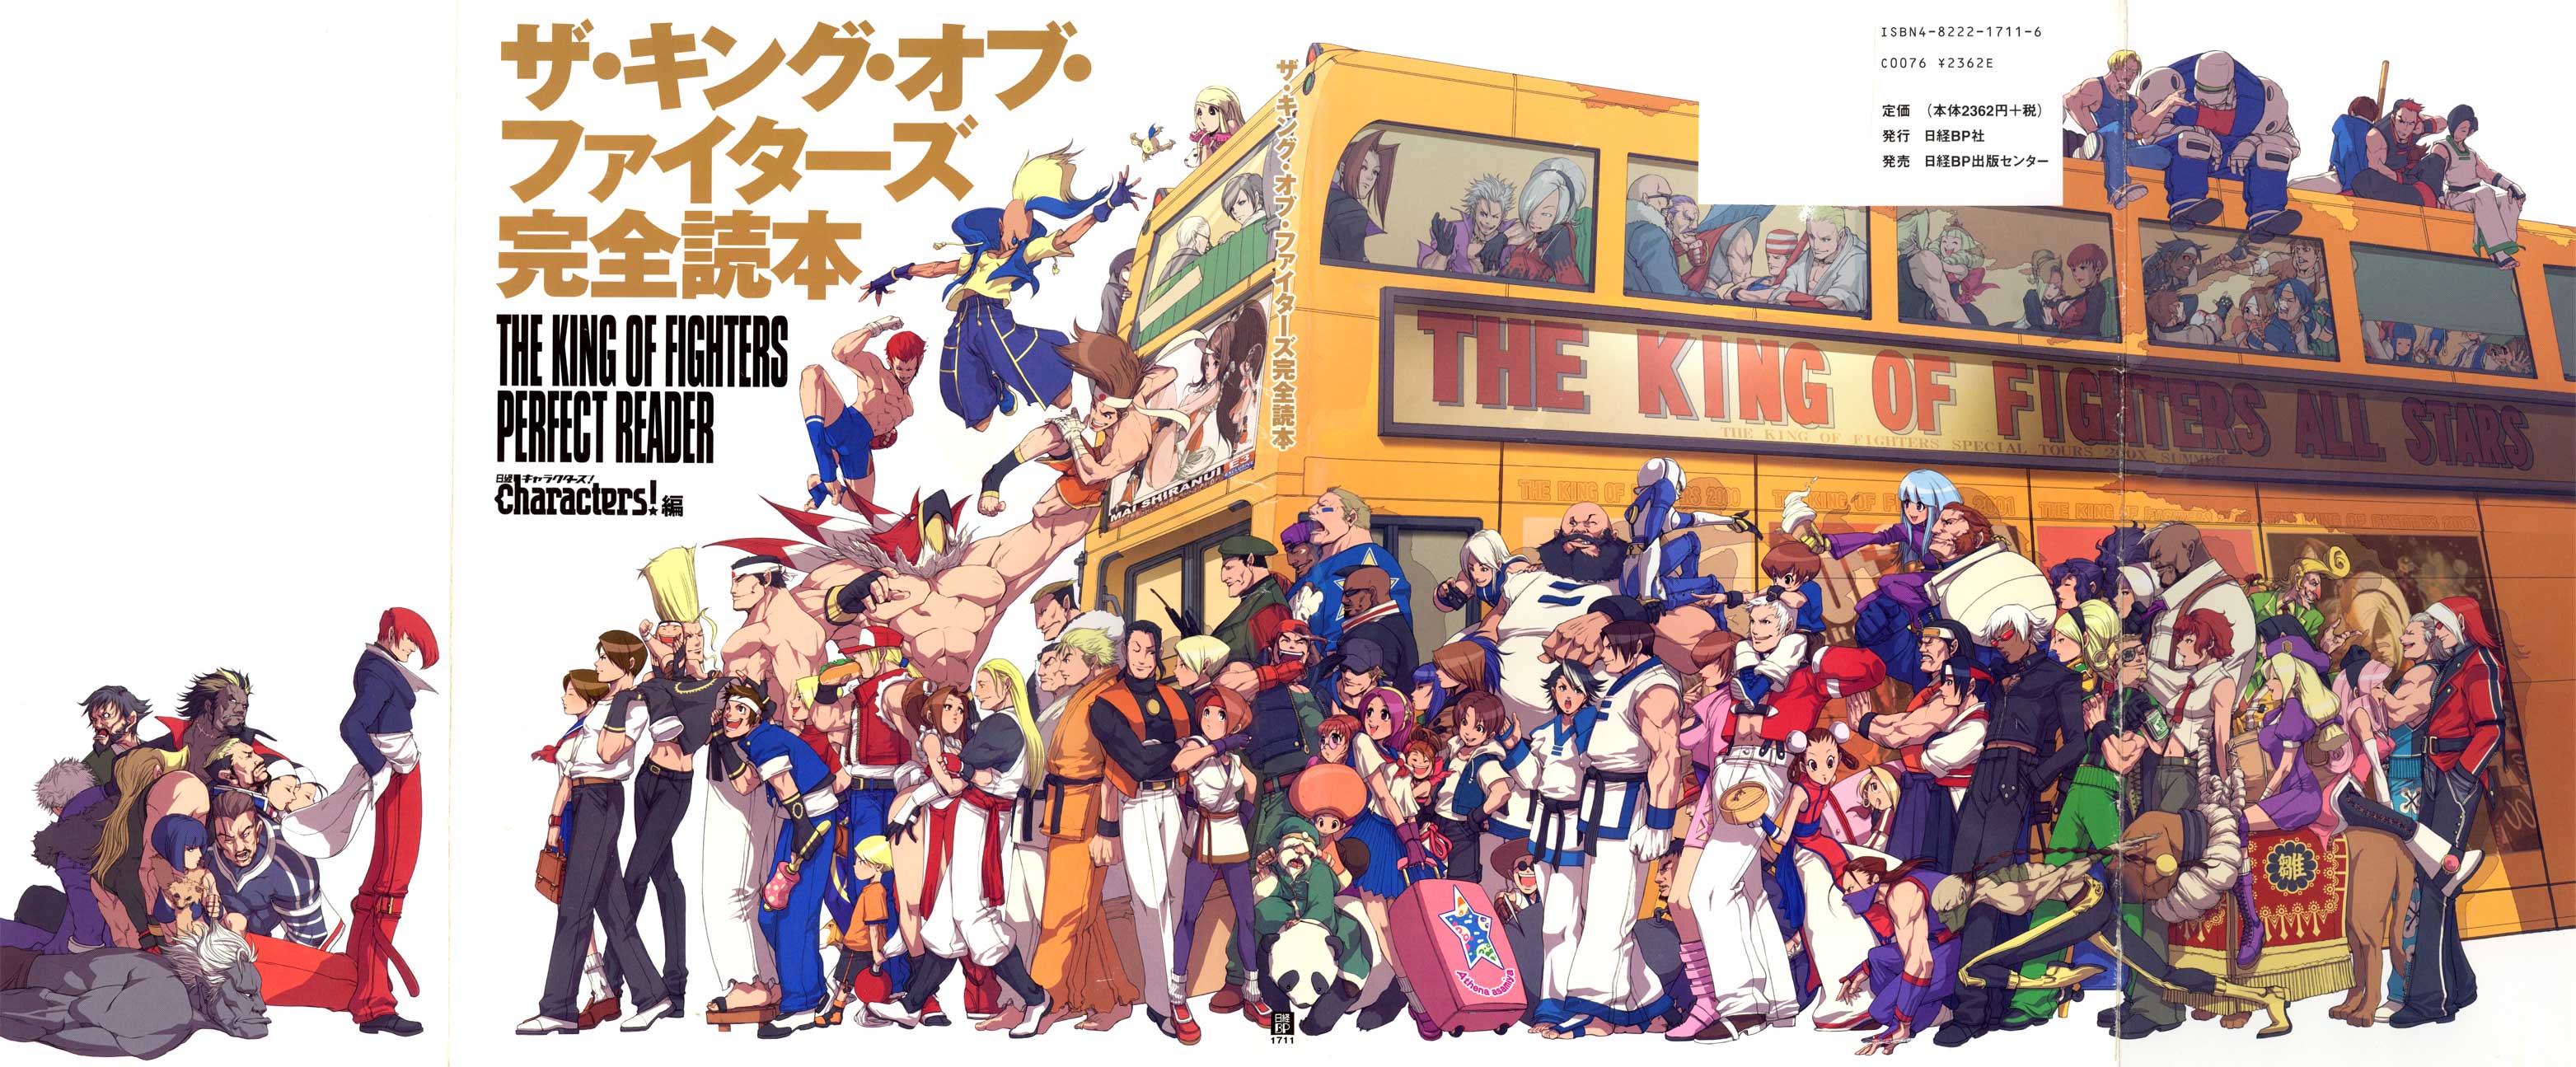 KOF Entire Roster Trhought the years